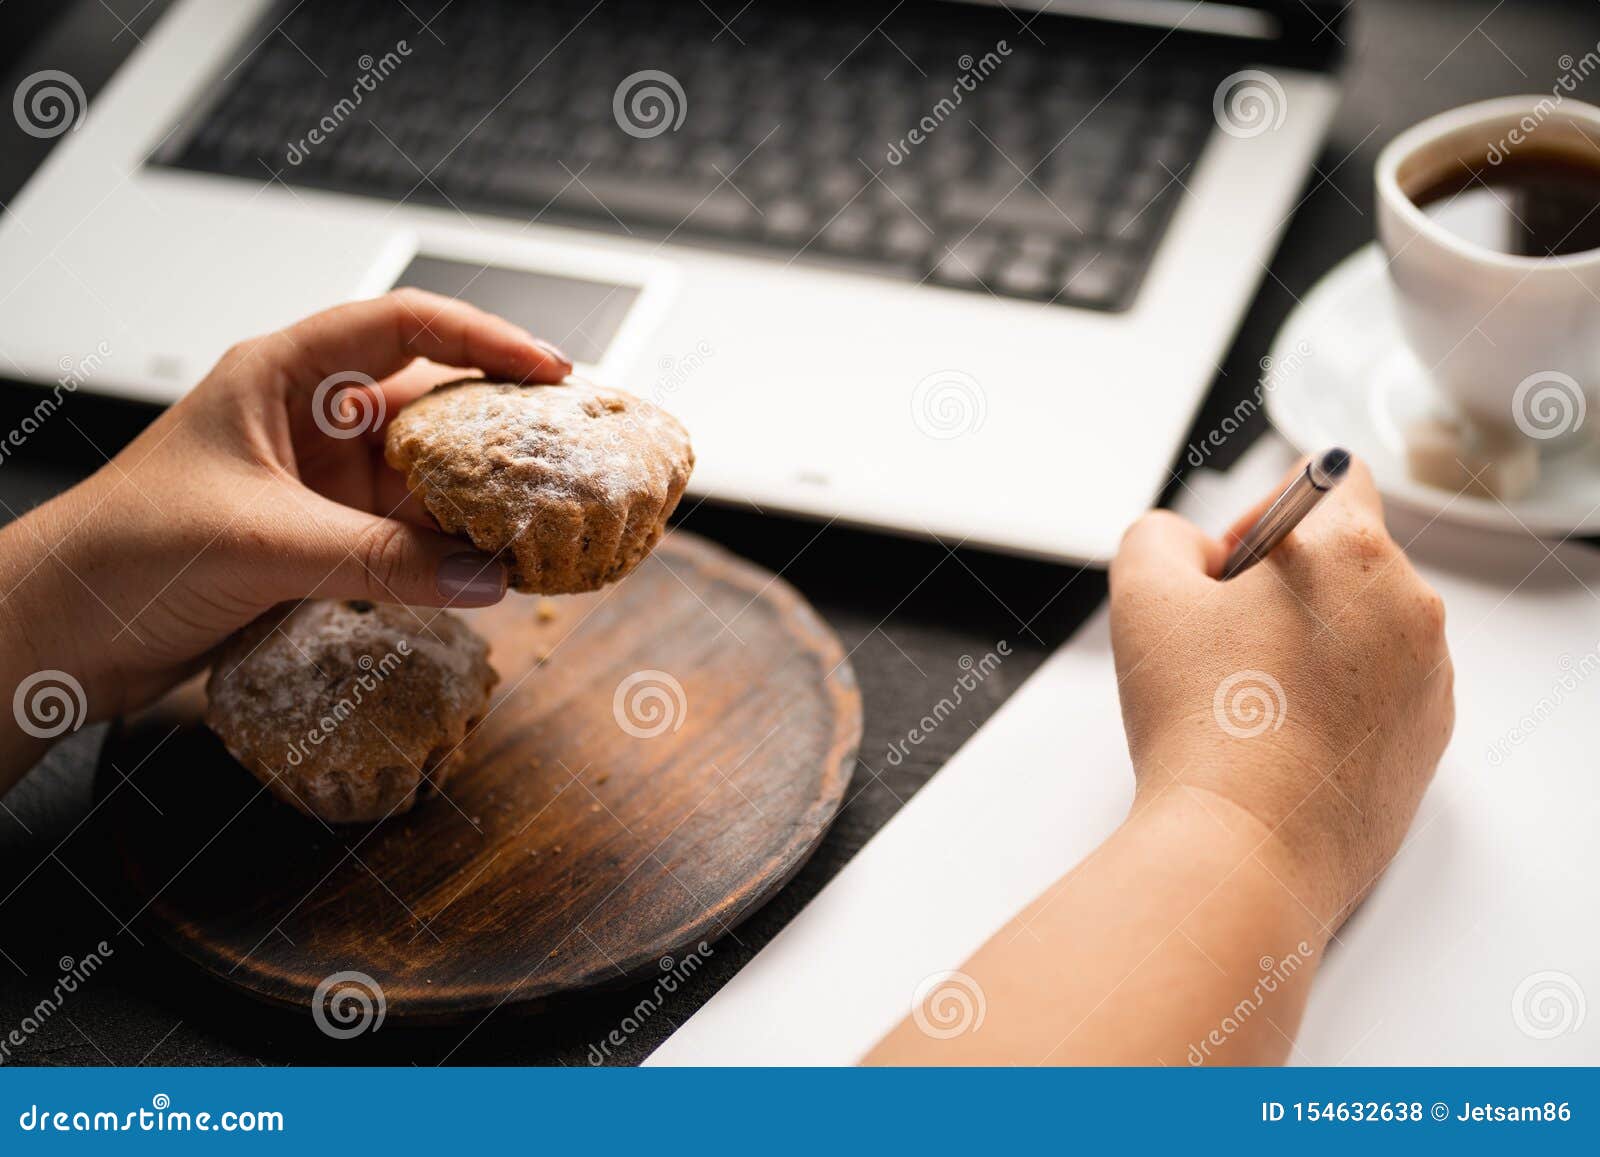 woman eating muffin at workplace. unhealthy snack